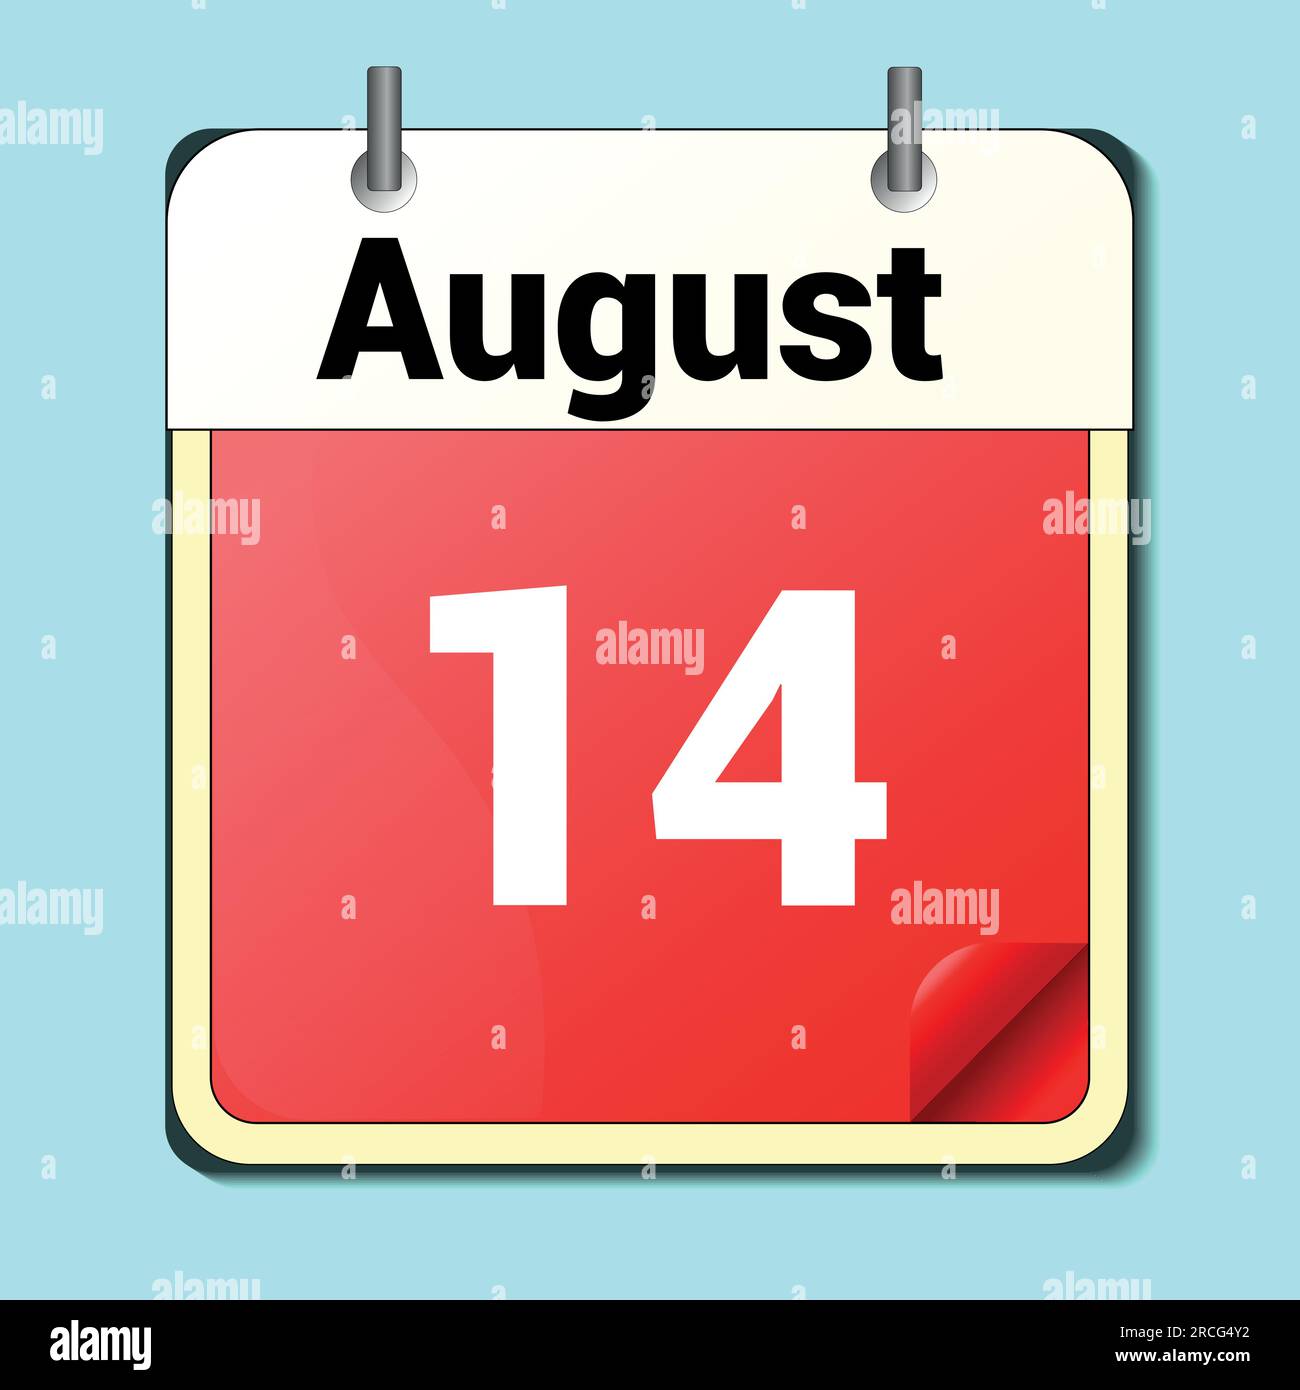 day on the calendar, vector image format, August 14. Stock Vector